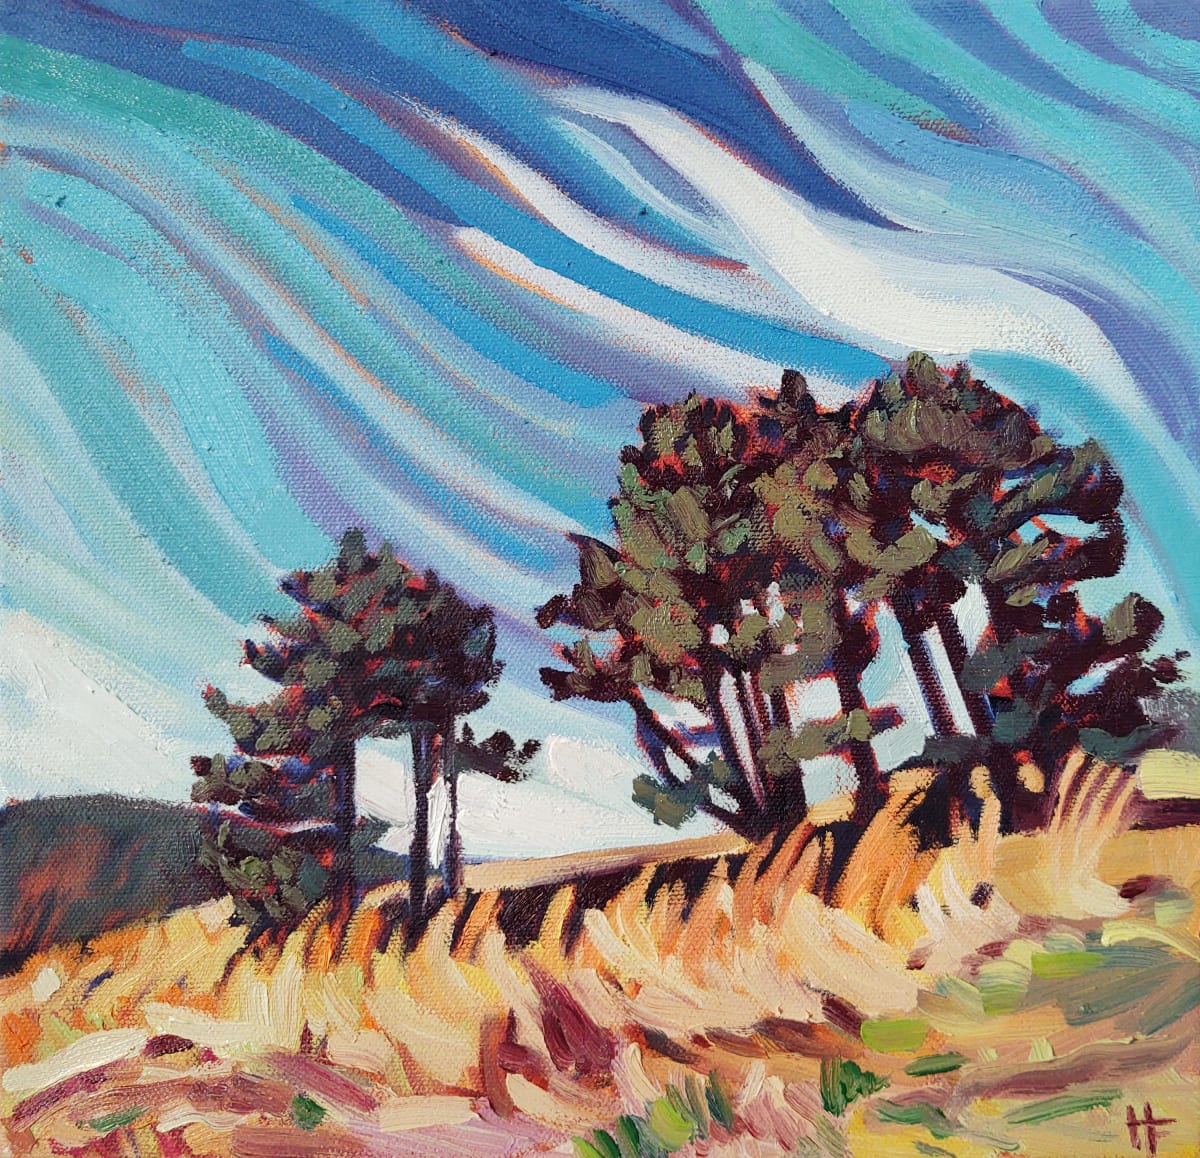 Sleeping Meadow by Heather Friedli  Image: A cluster of sun-lit red pines overlook a sleepy meadow ready to burst forth in anticipation. A brilliant blue sky with wispy clouds shines above. Spring green sprouts poke their heads just below the dry grass, feeling the invigorating warmth of an early spring sun.